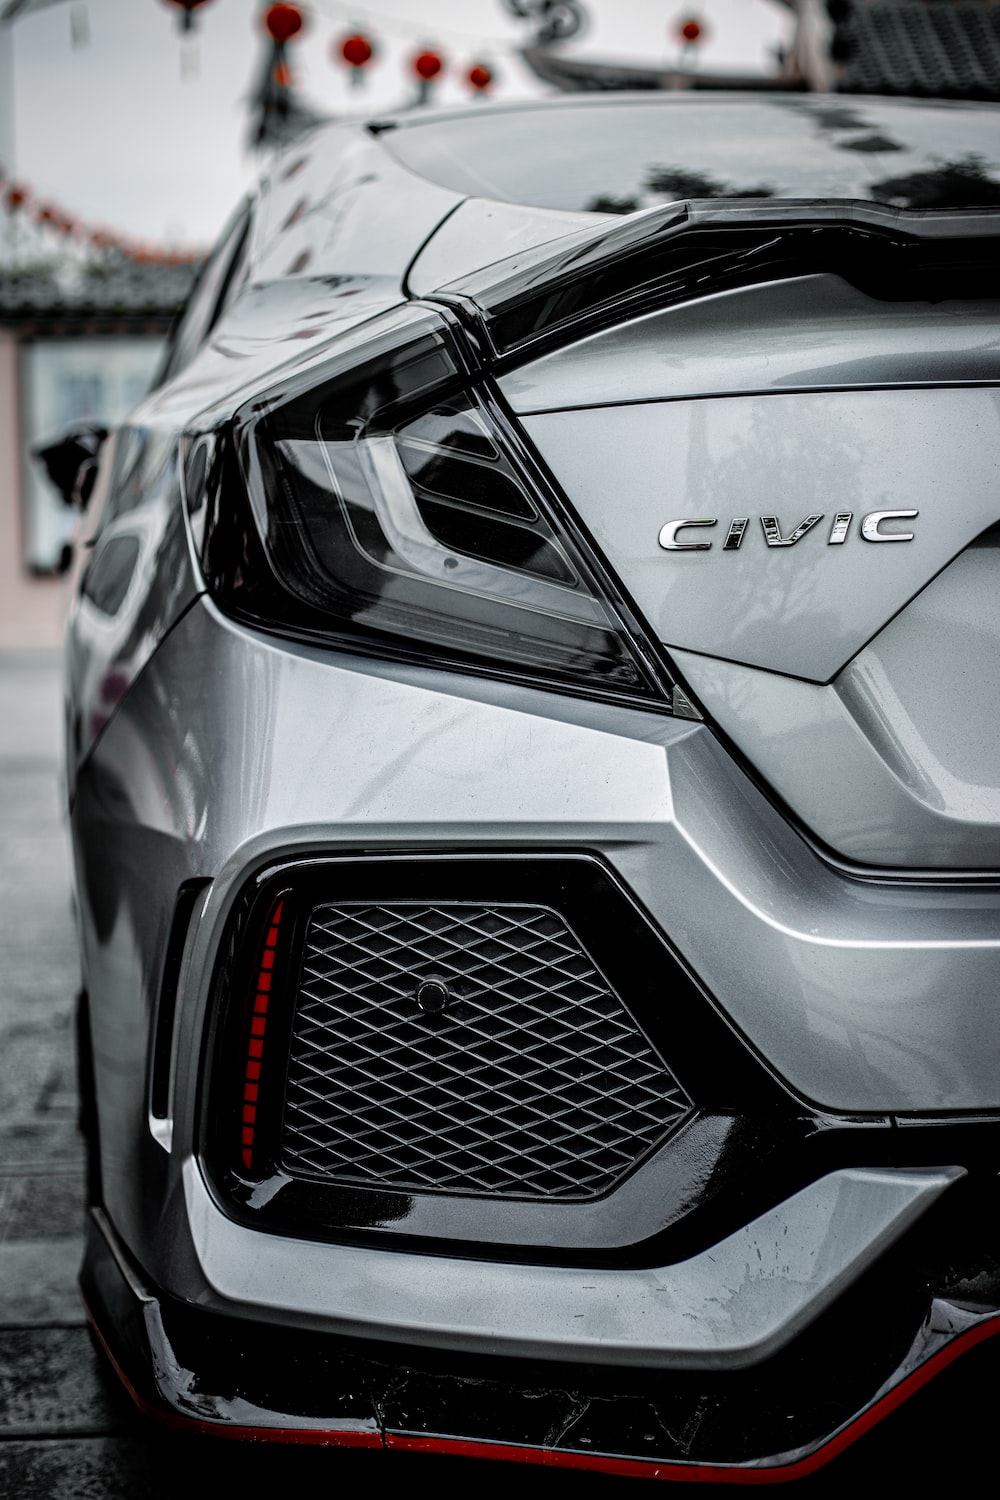 500+ Honda Civic Pictures [HD] | Download Free Images on Unsplash